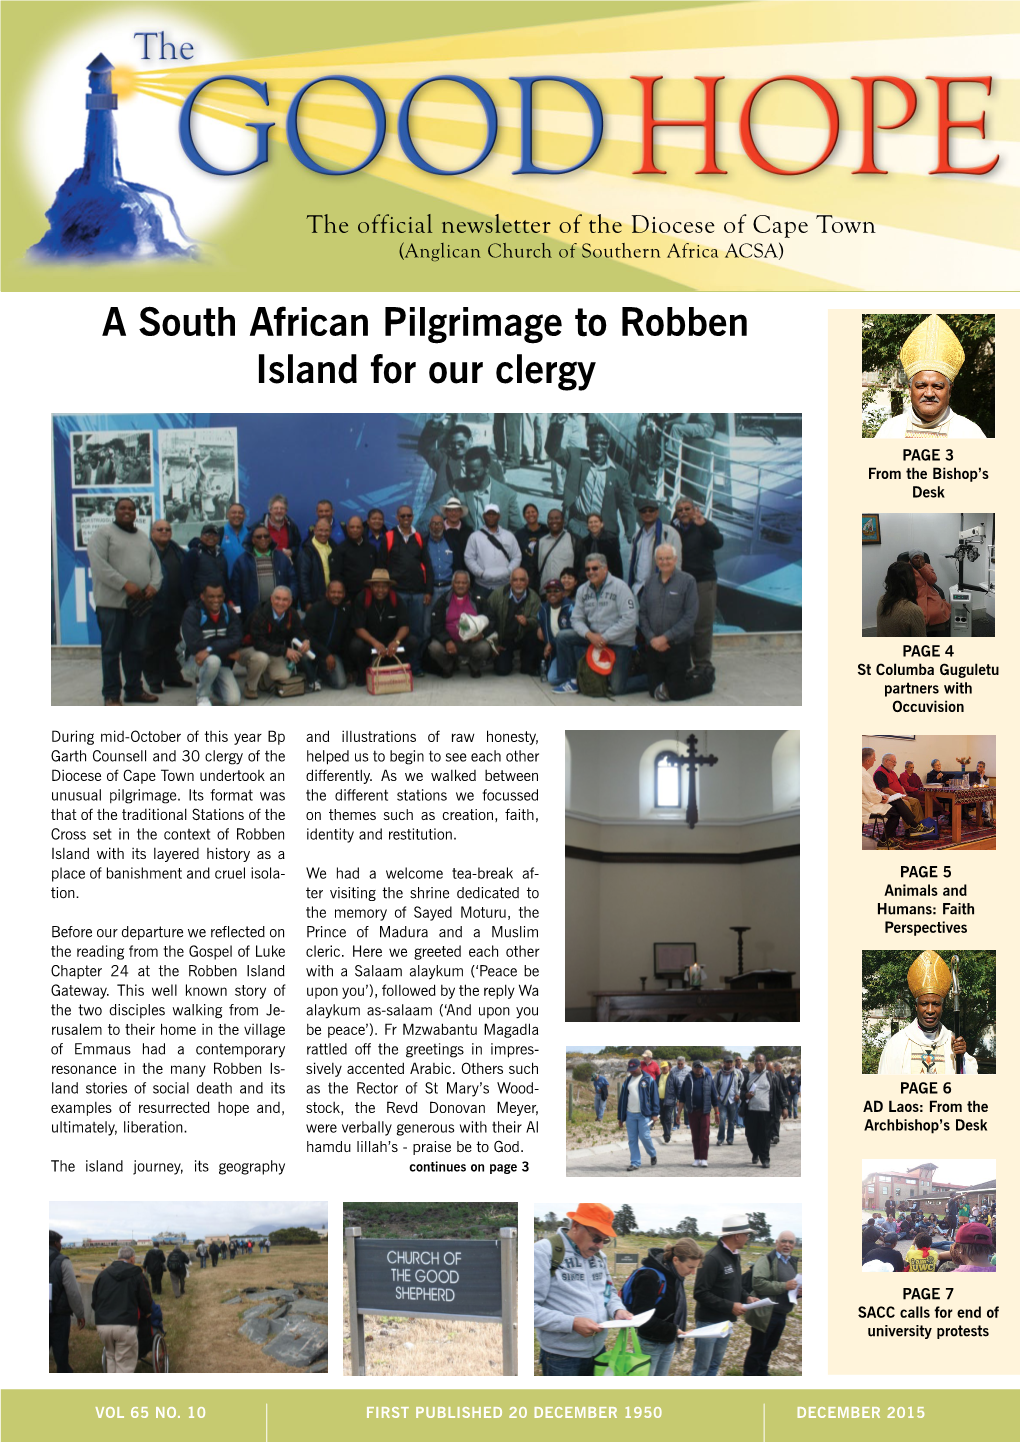 A South African Pilgrimage to Robben Island for Our Clergy